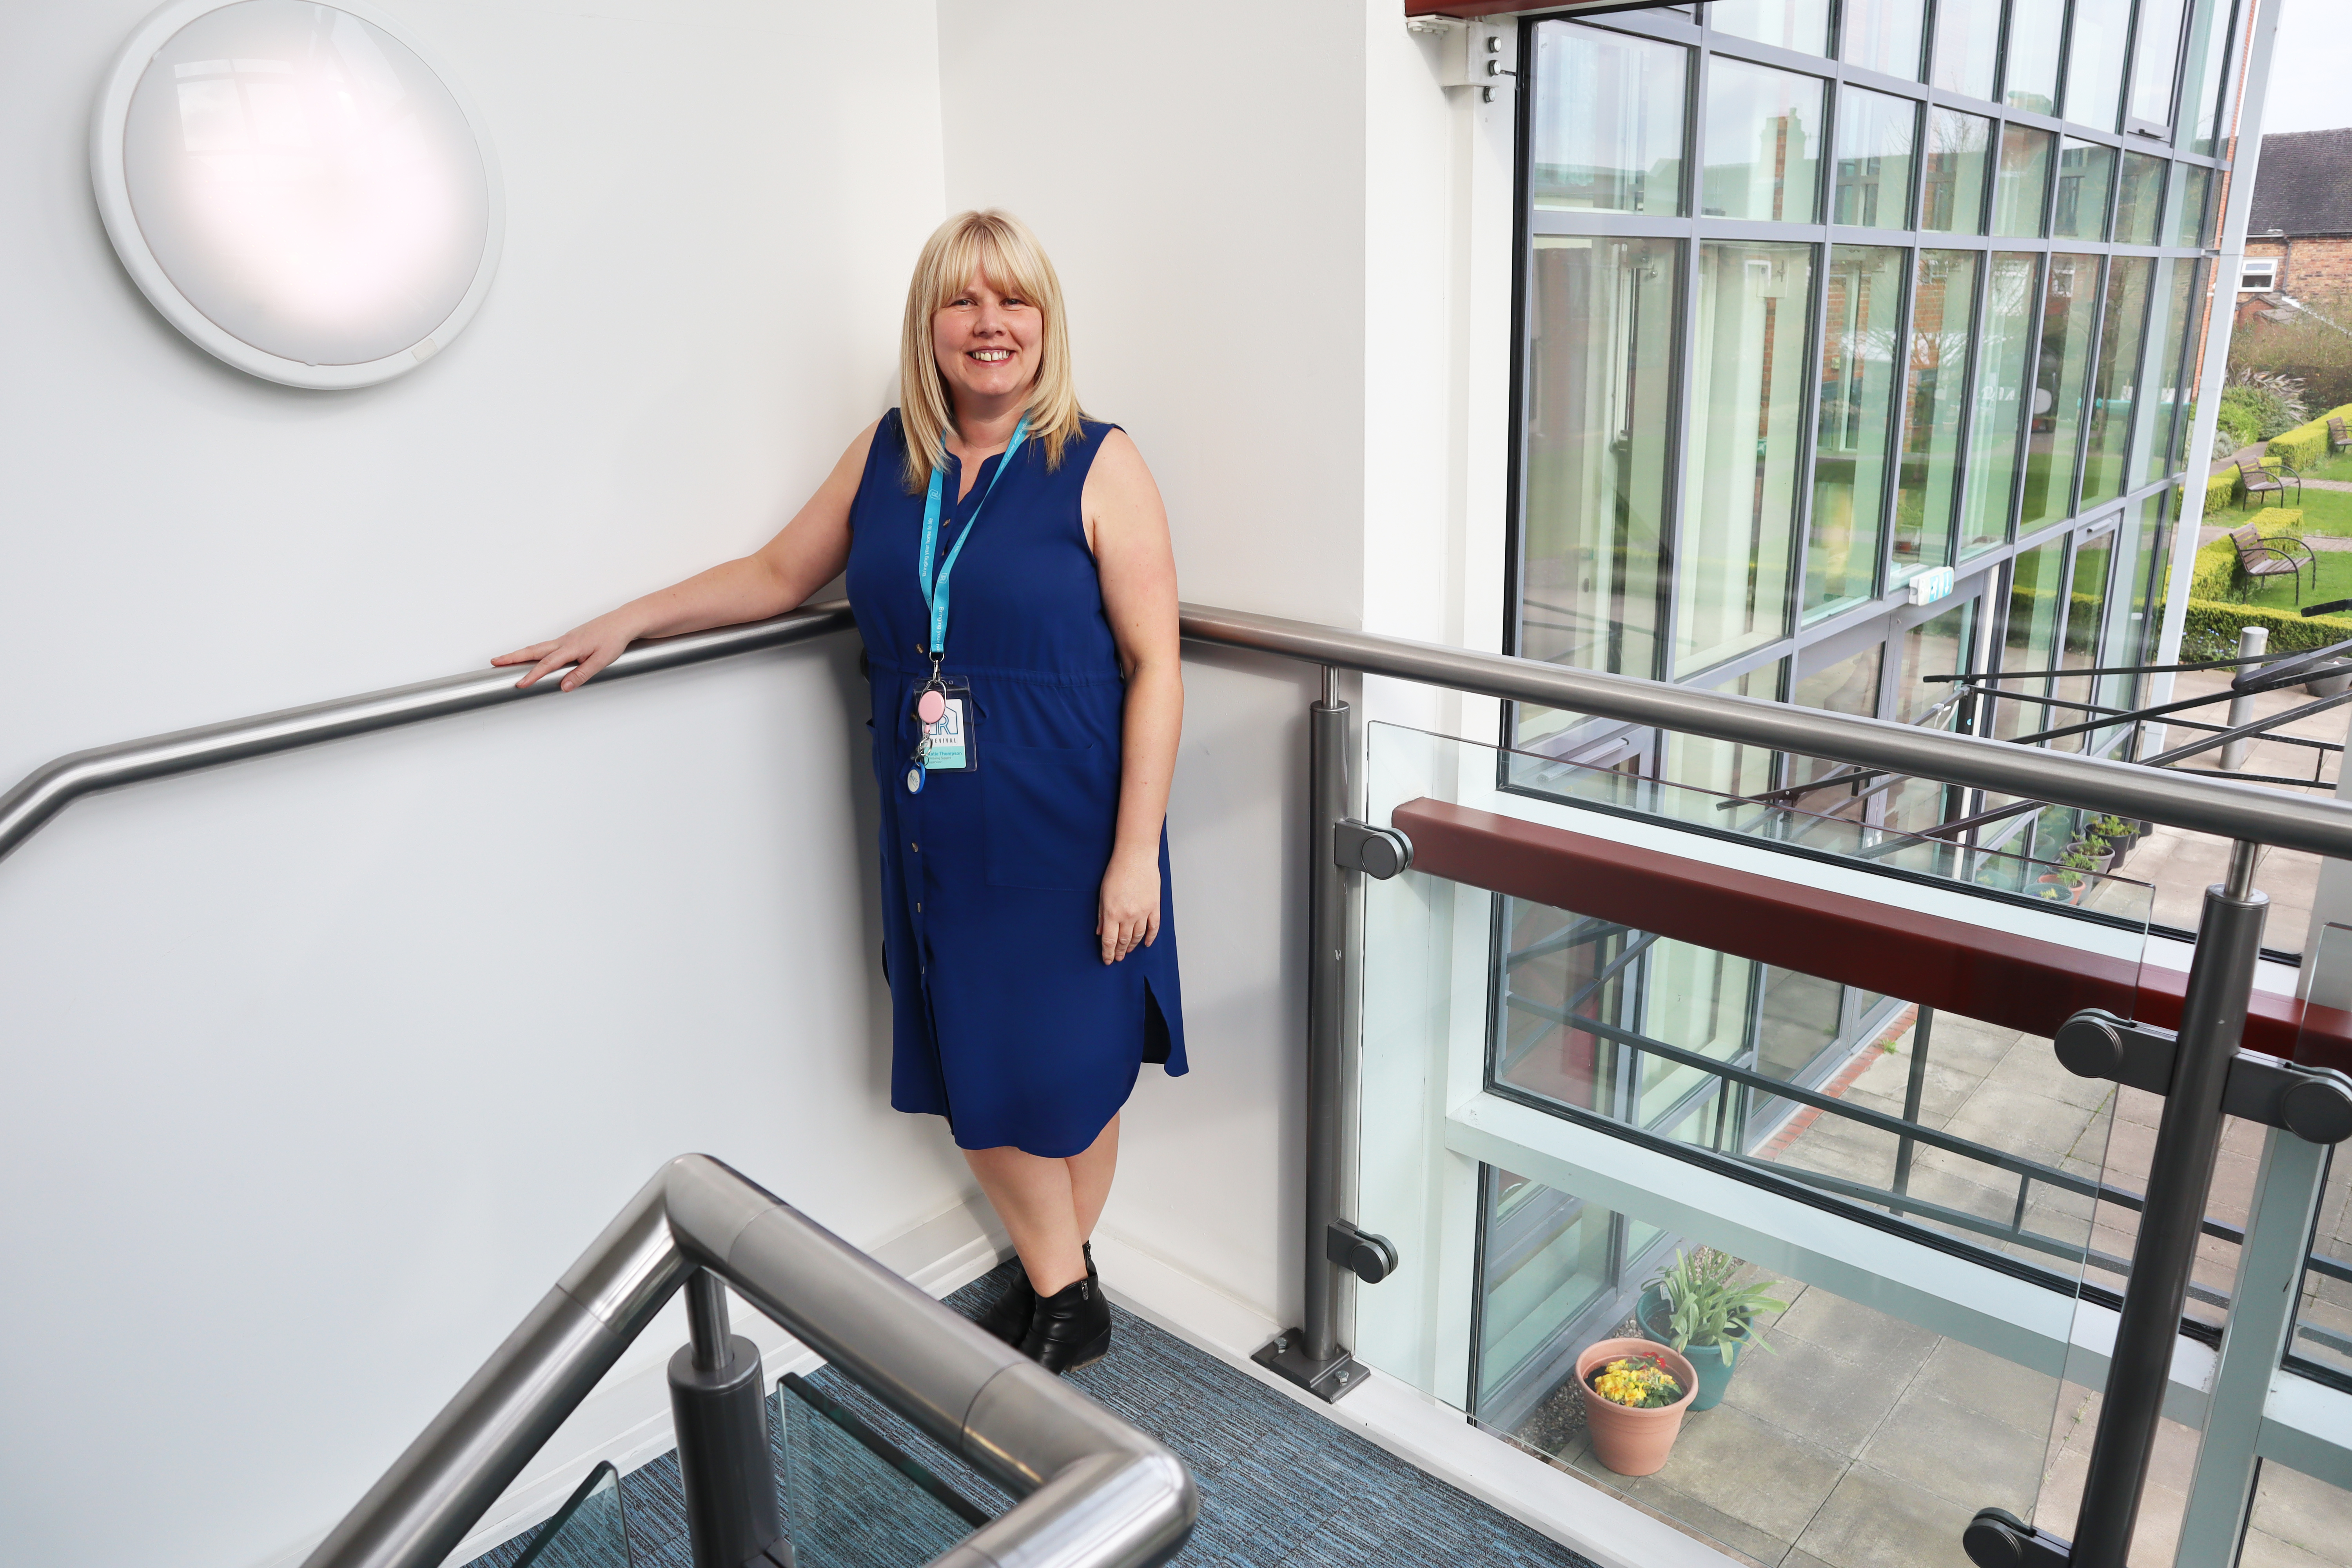 Operations Manager Katie stood at the top of a stairwell, looking at the camera and smiling